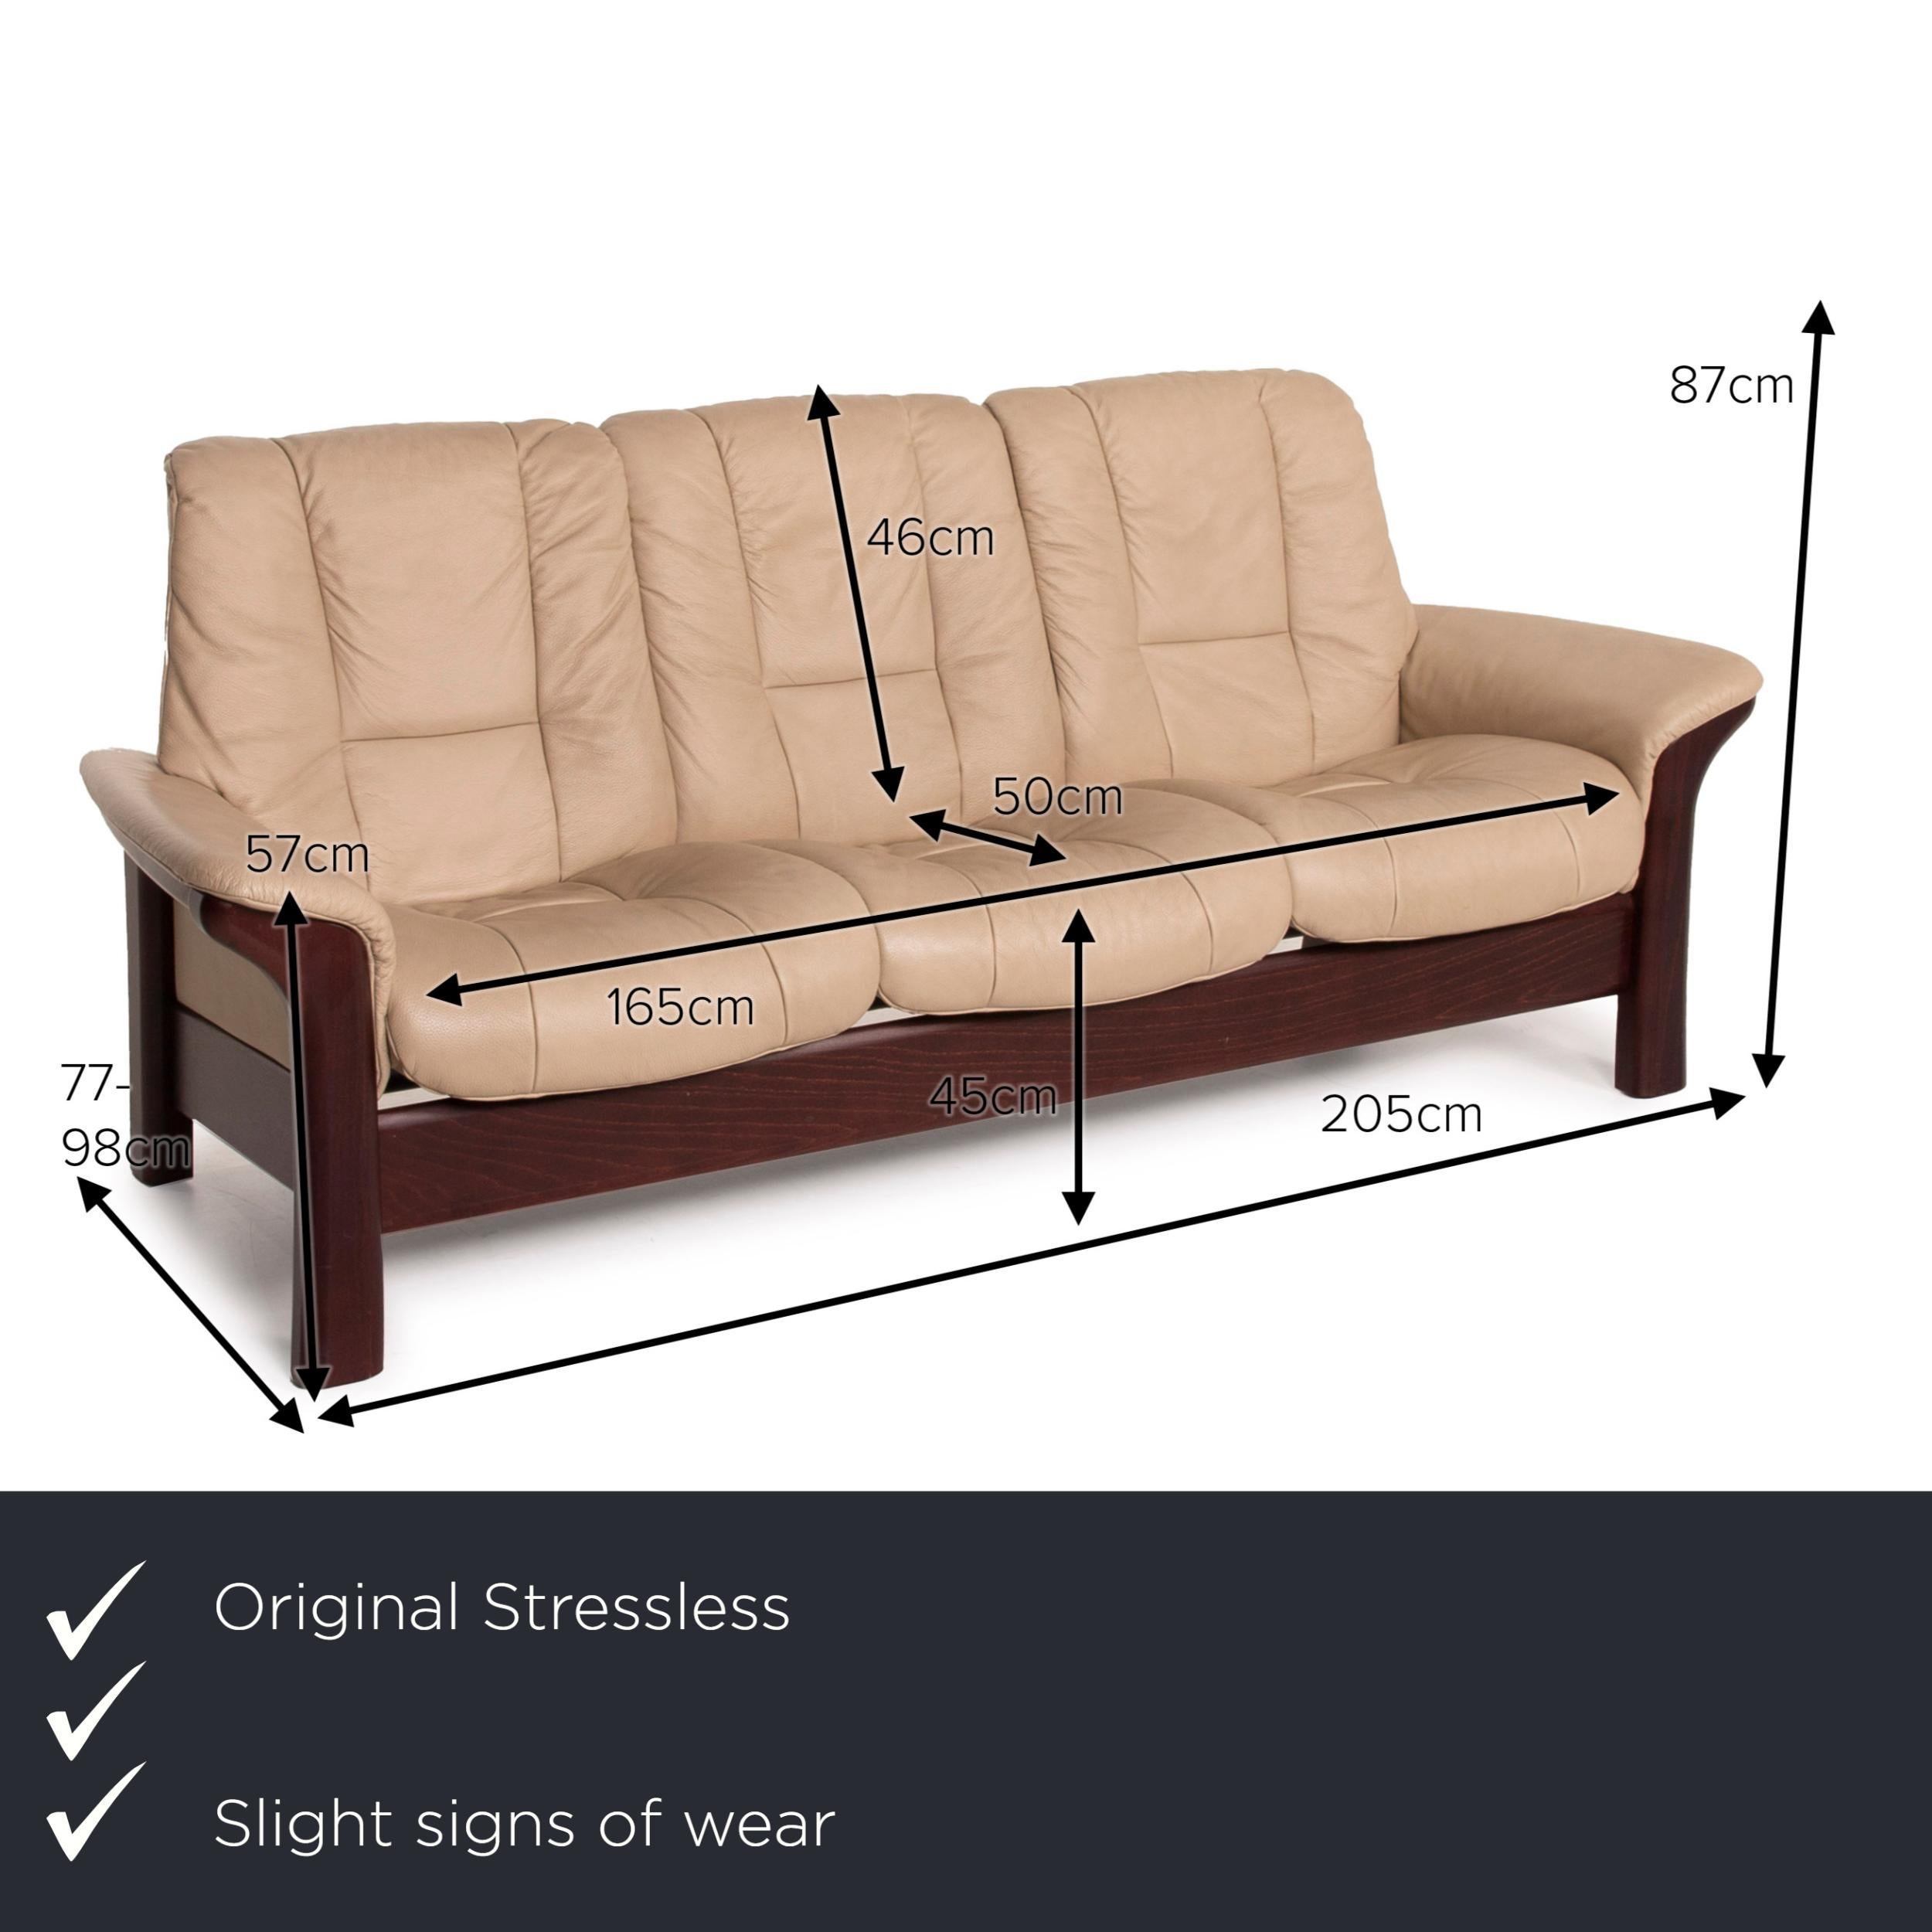 We present to you a Stressless Windsor leather sofa beige three-seater relax function.

Product measurements in centimeters:

Depth 77
Width 205
Height 87
Seat height 45
Rest height 57
Seat depth 50
Seat width 165
Back height